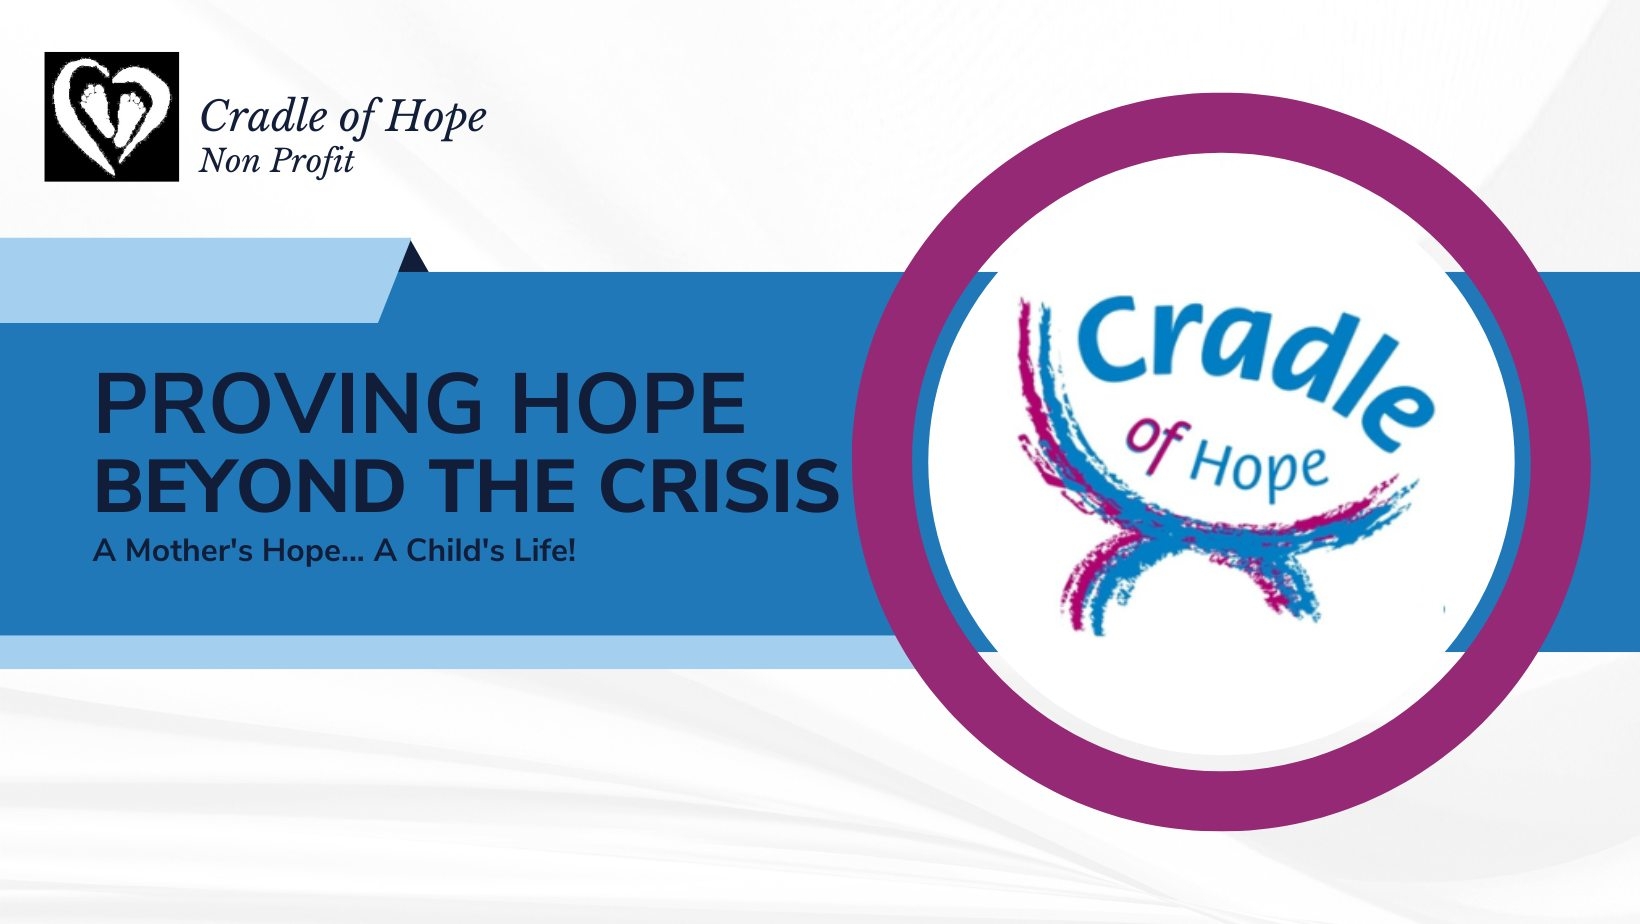 Cradle of Hope - Pregnant Women Assistance